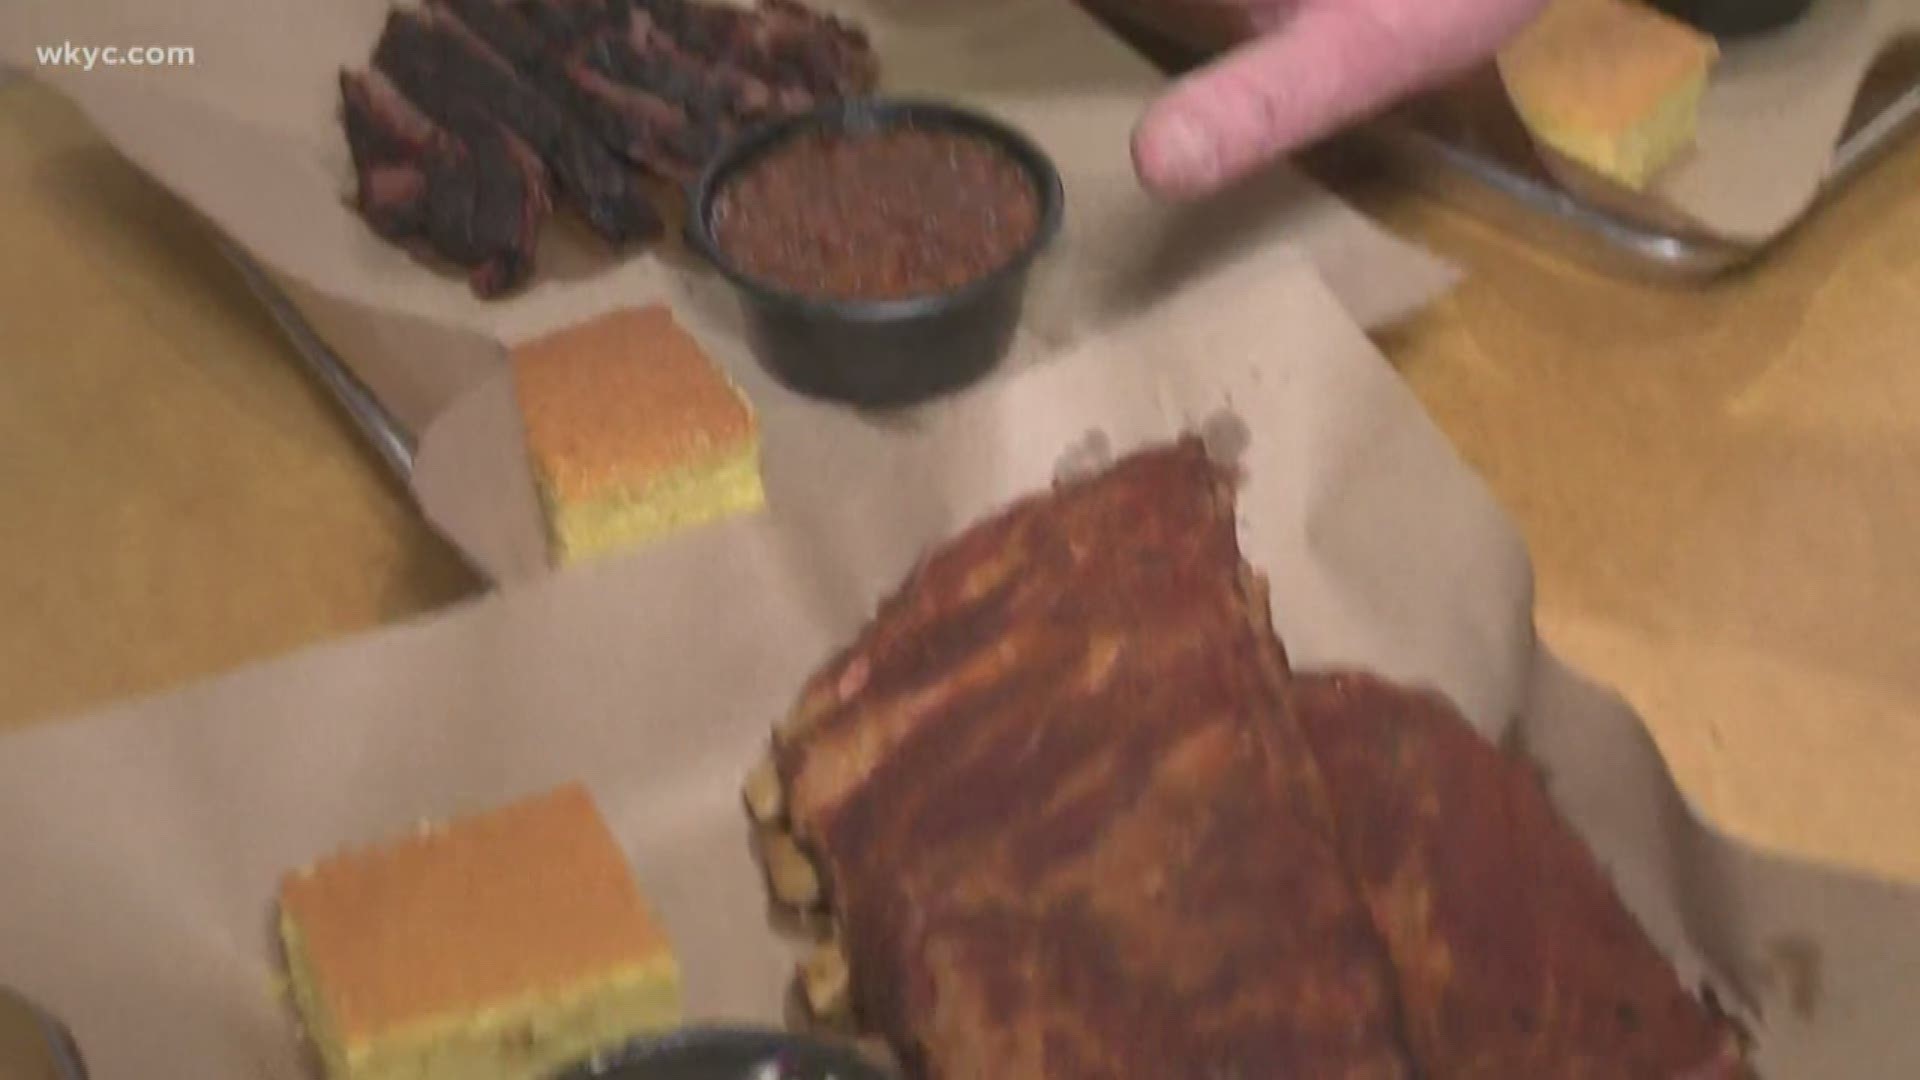 A new location of Mission BBQ is opening this week. 3News' Brandon Simmons gets a first look at the place.